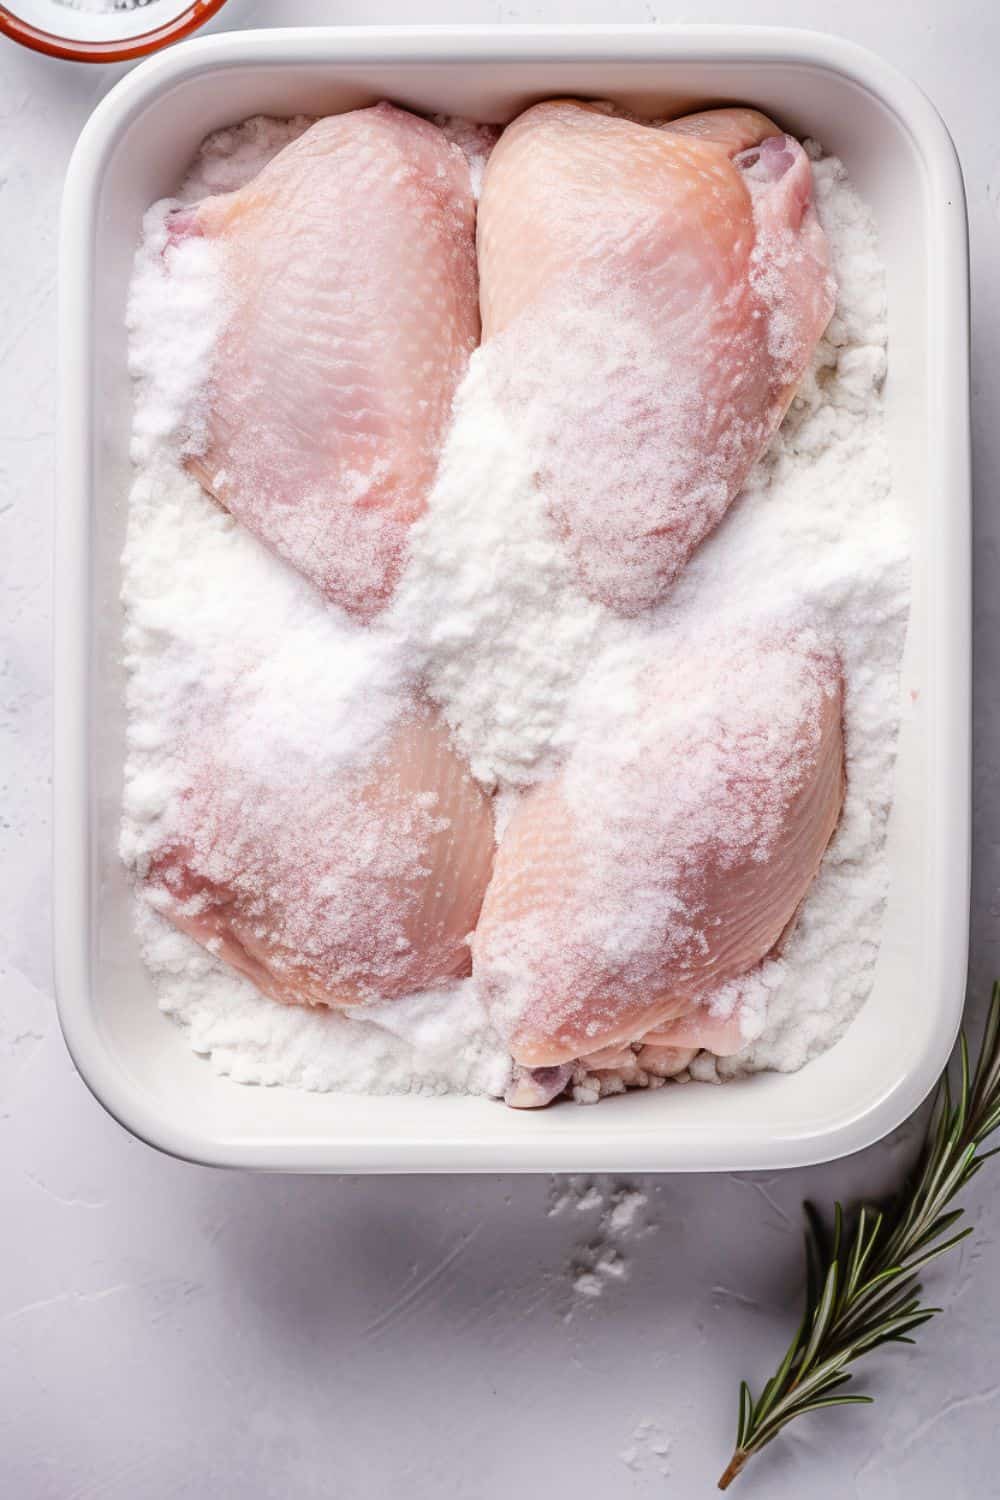 Chicken pieces coated in flour.